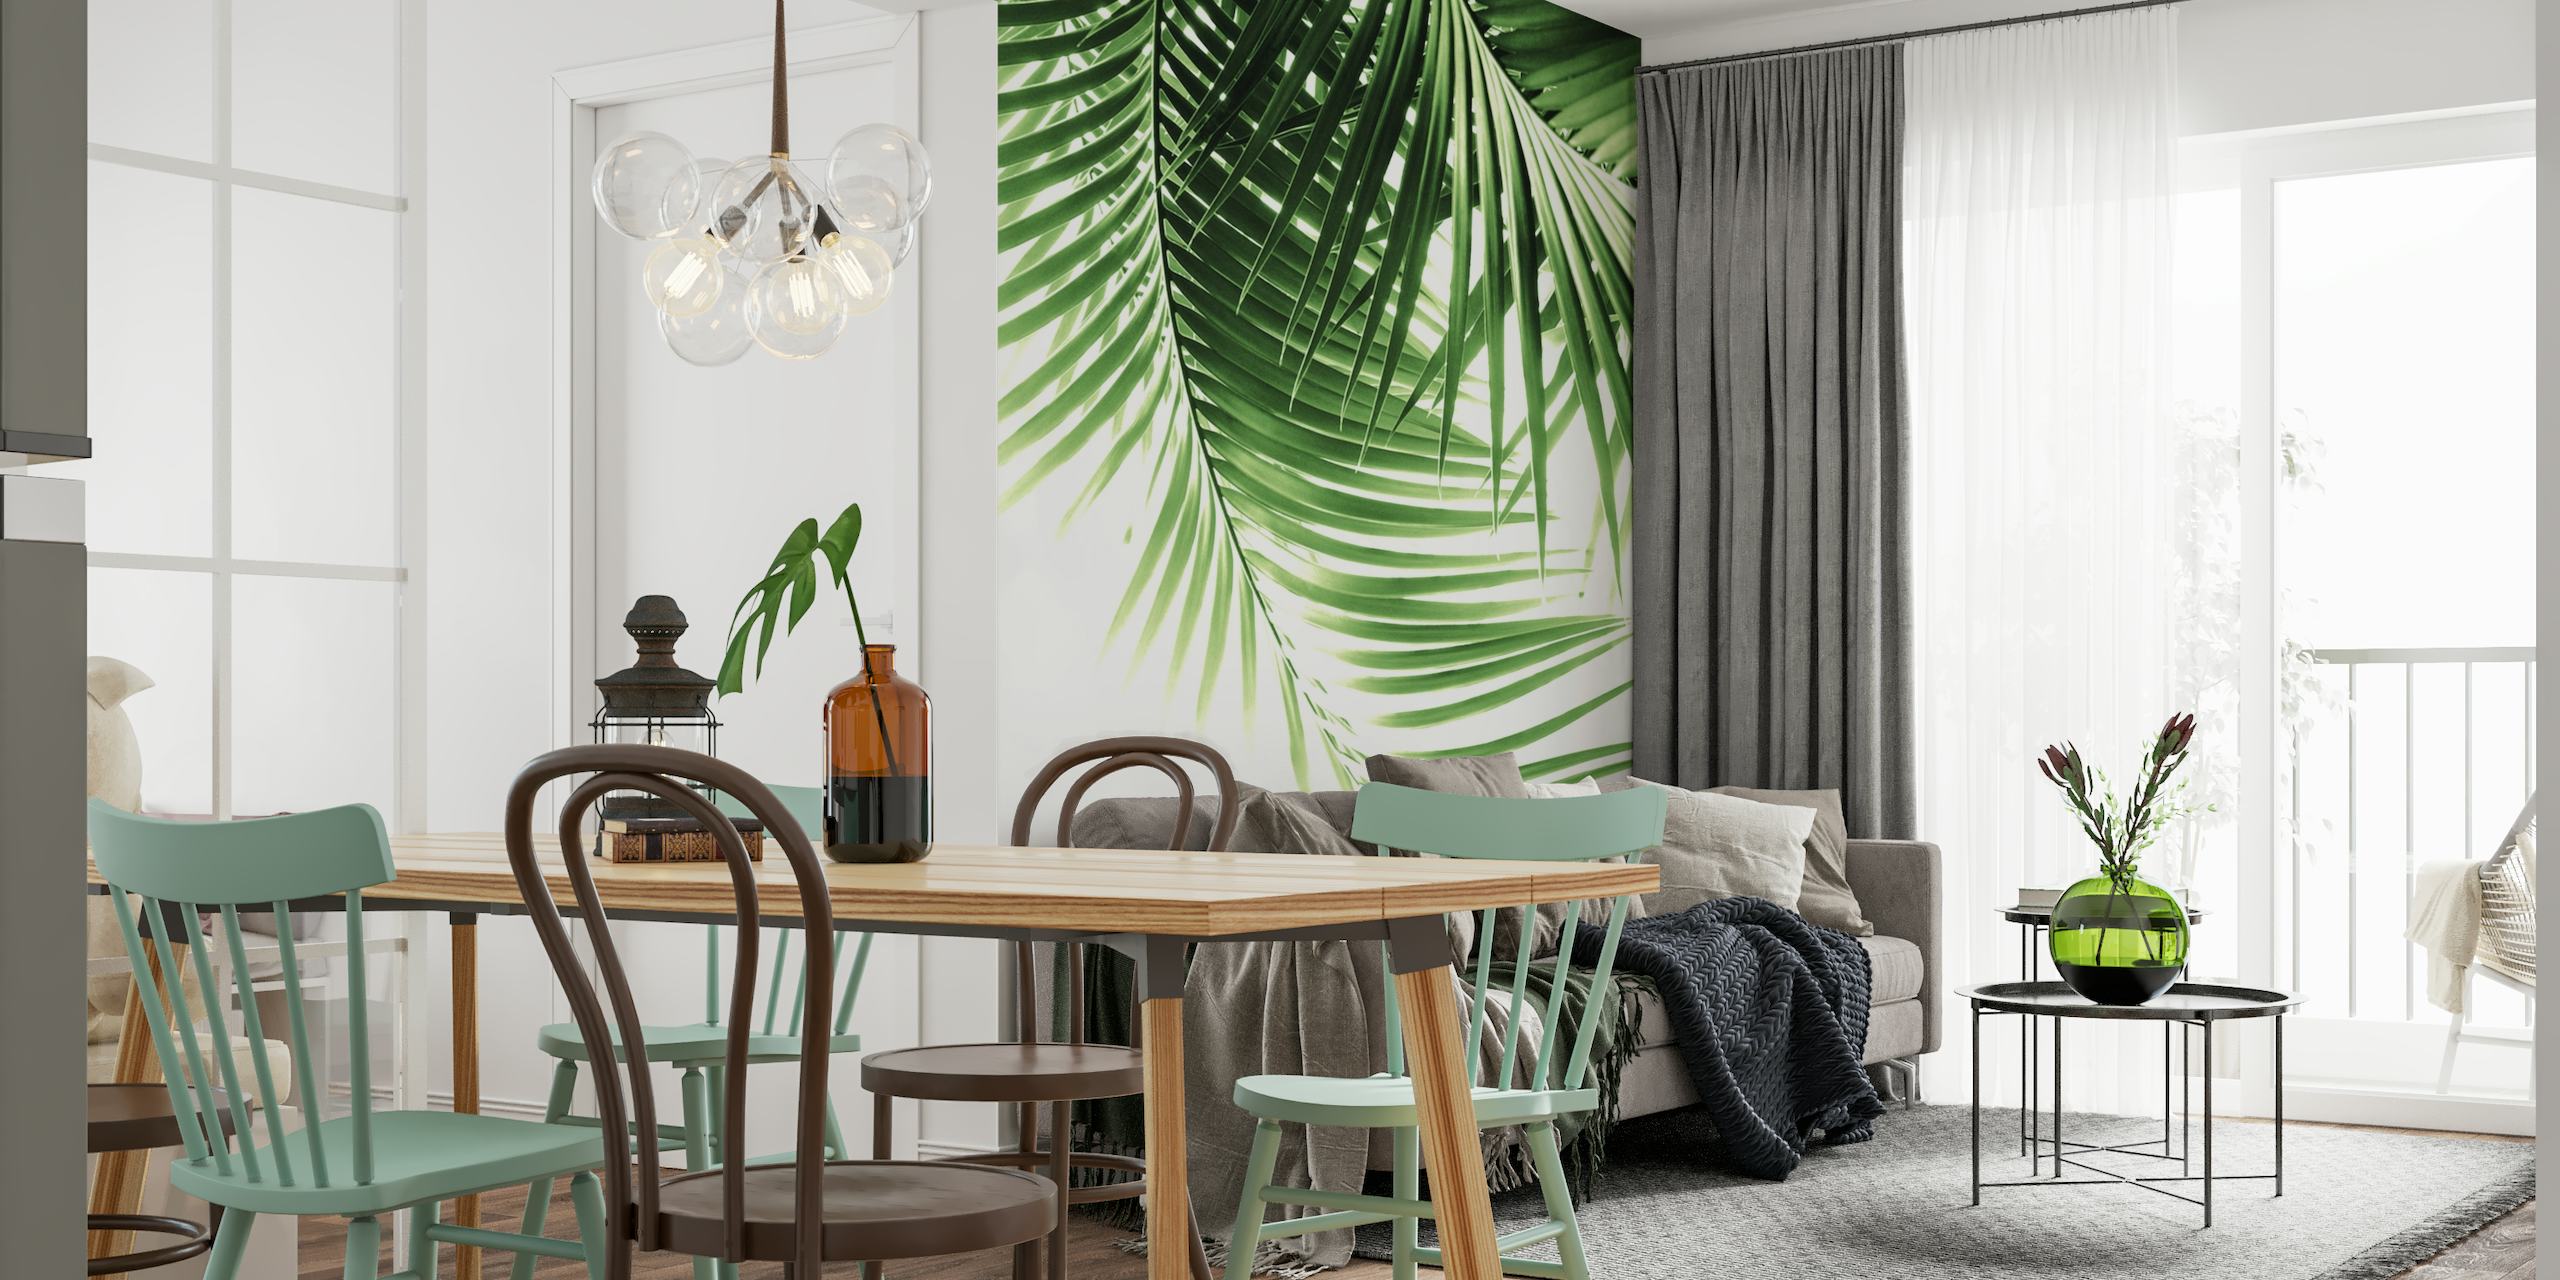 Palm Leaves Green Vibes 9 tapete